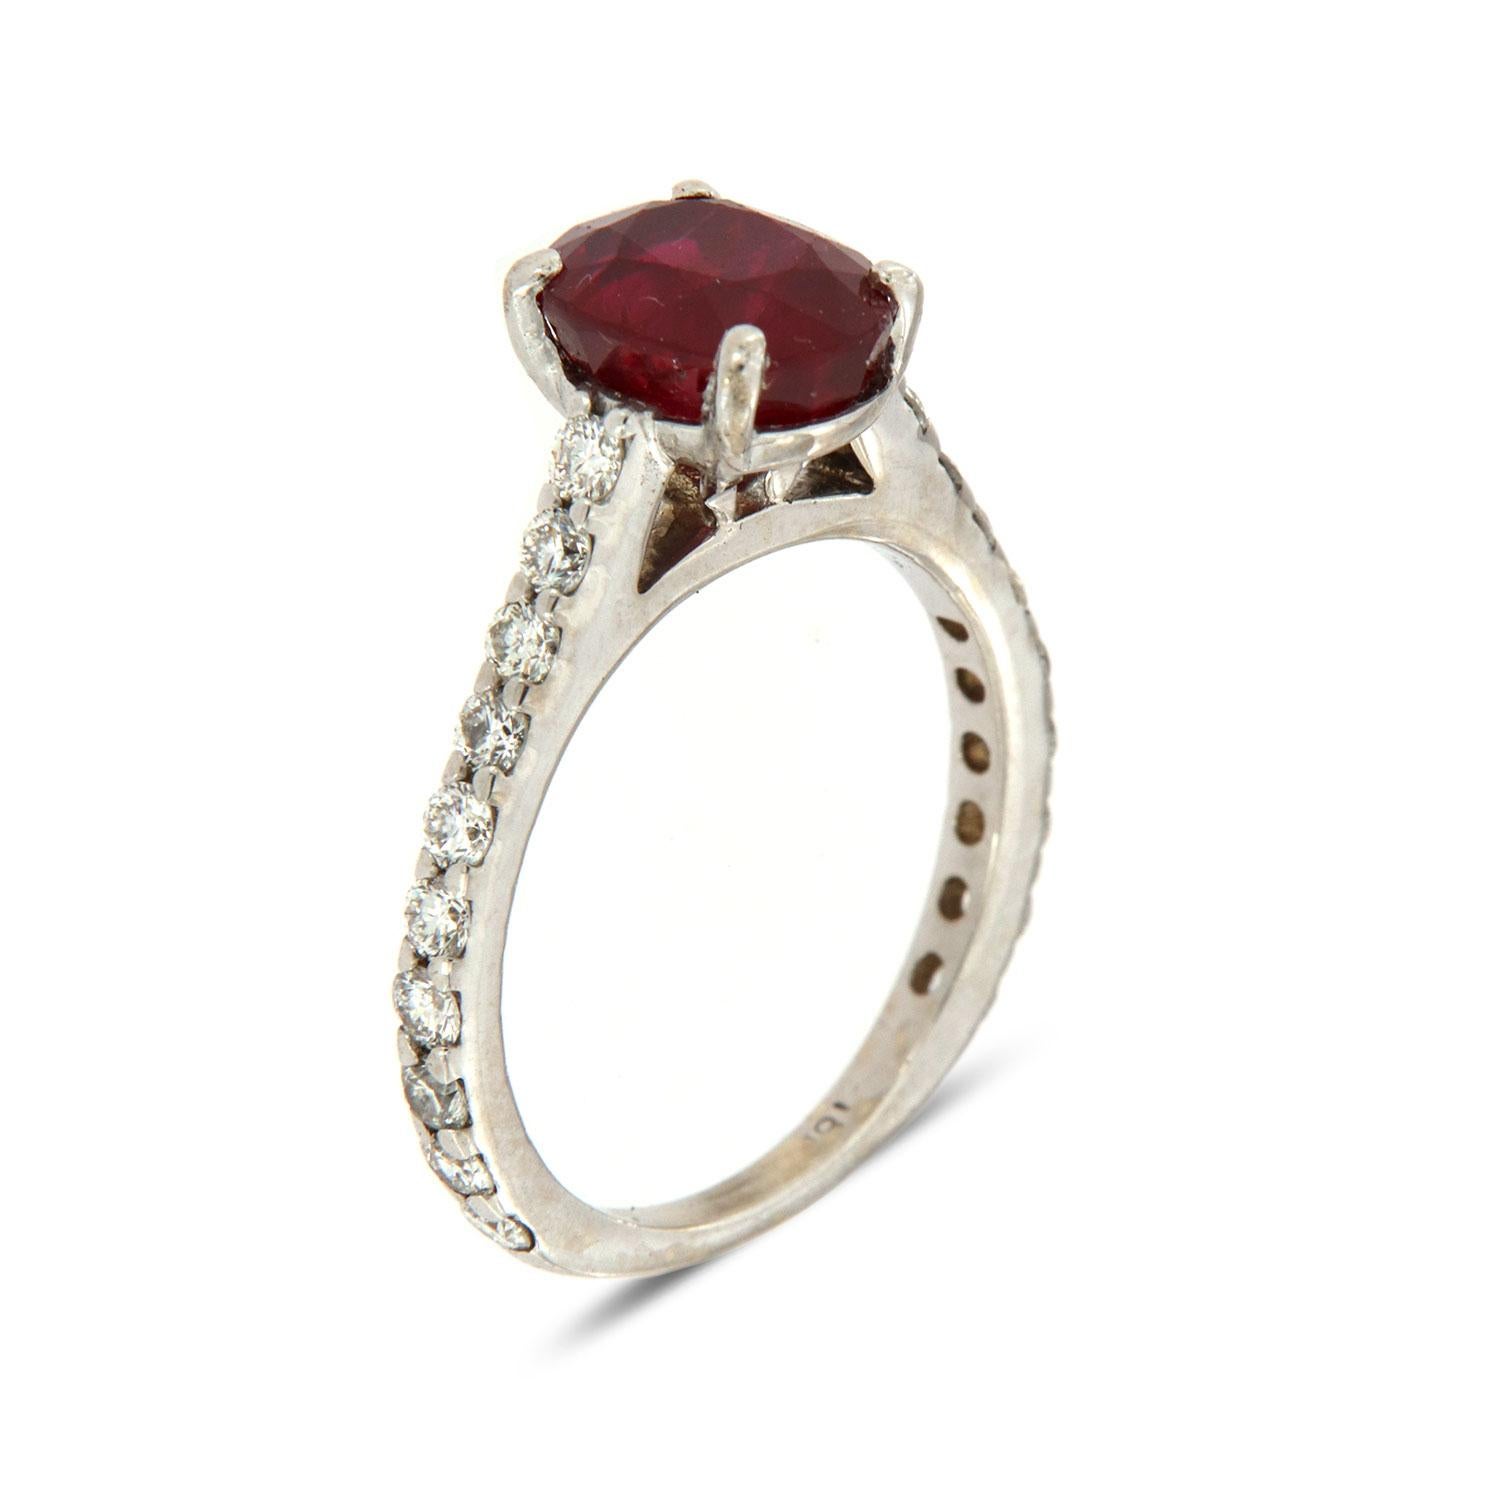 This Pre Owned 18k White Gold ring features twenty brilliant round diamonds Micro-Prong set on a 2.1 MM wide band. In the center of the ring is set 2.68 Carat Oval Shaped Ruby GIA certificate number 5201148744. The ruby showcases a pretty deep red